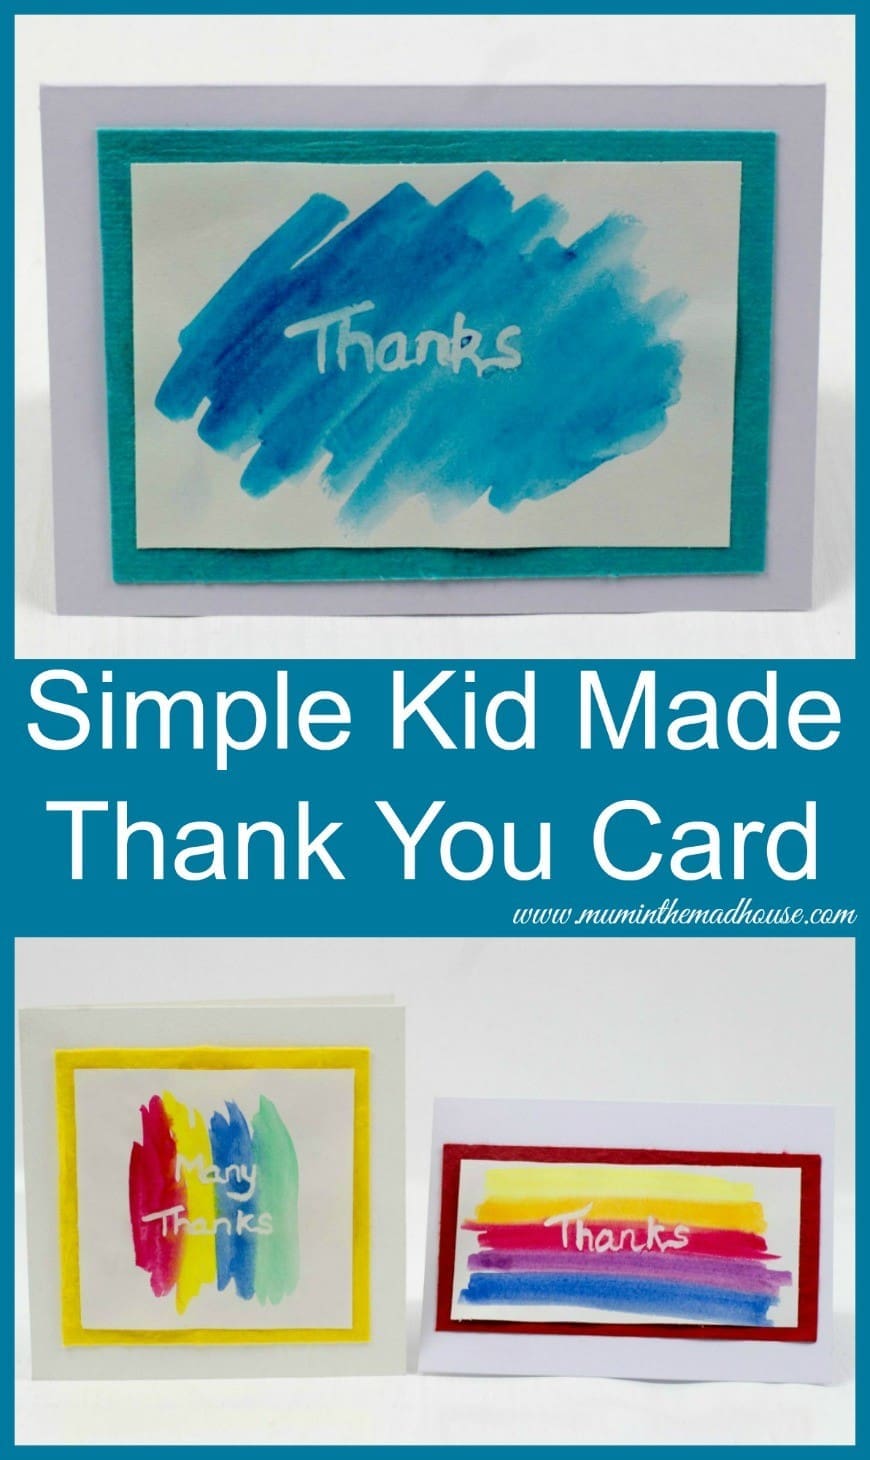 Simple Kid Made Thank You Card